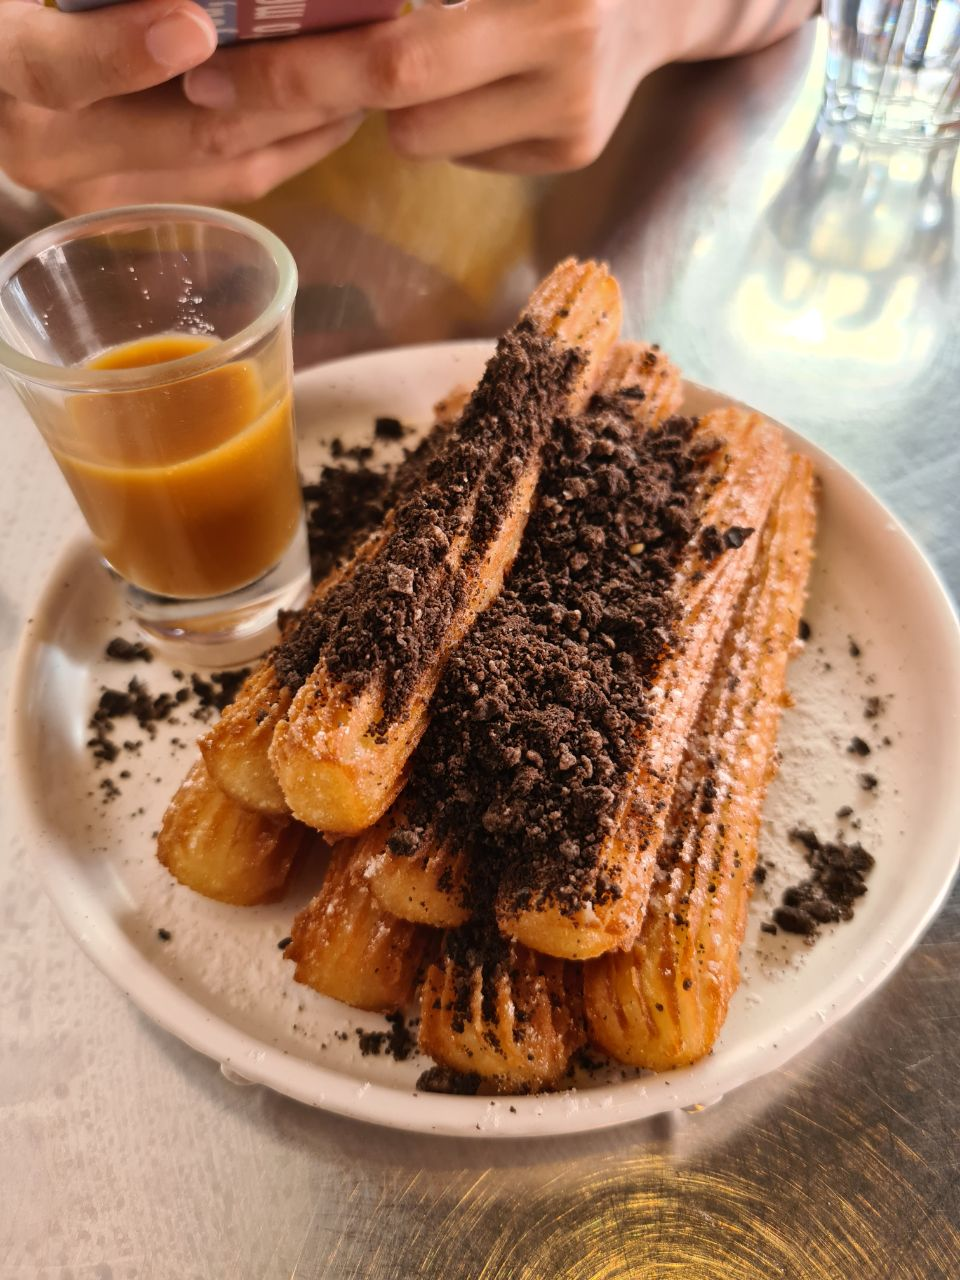 Churros from The Alley